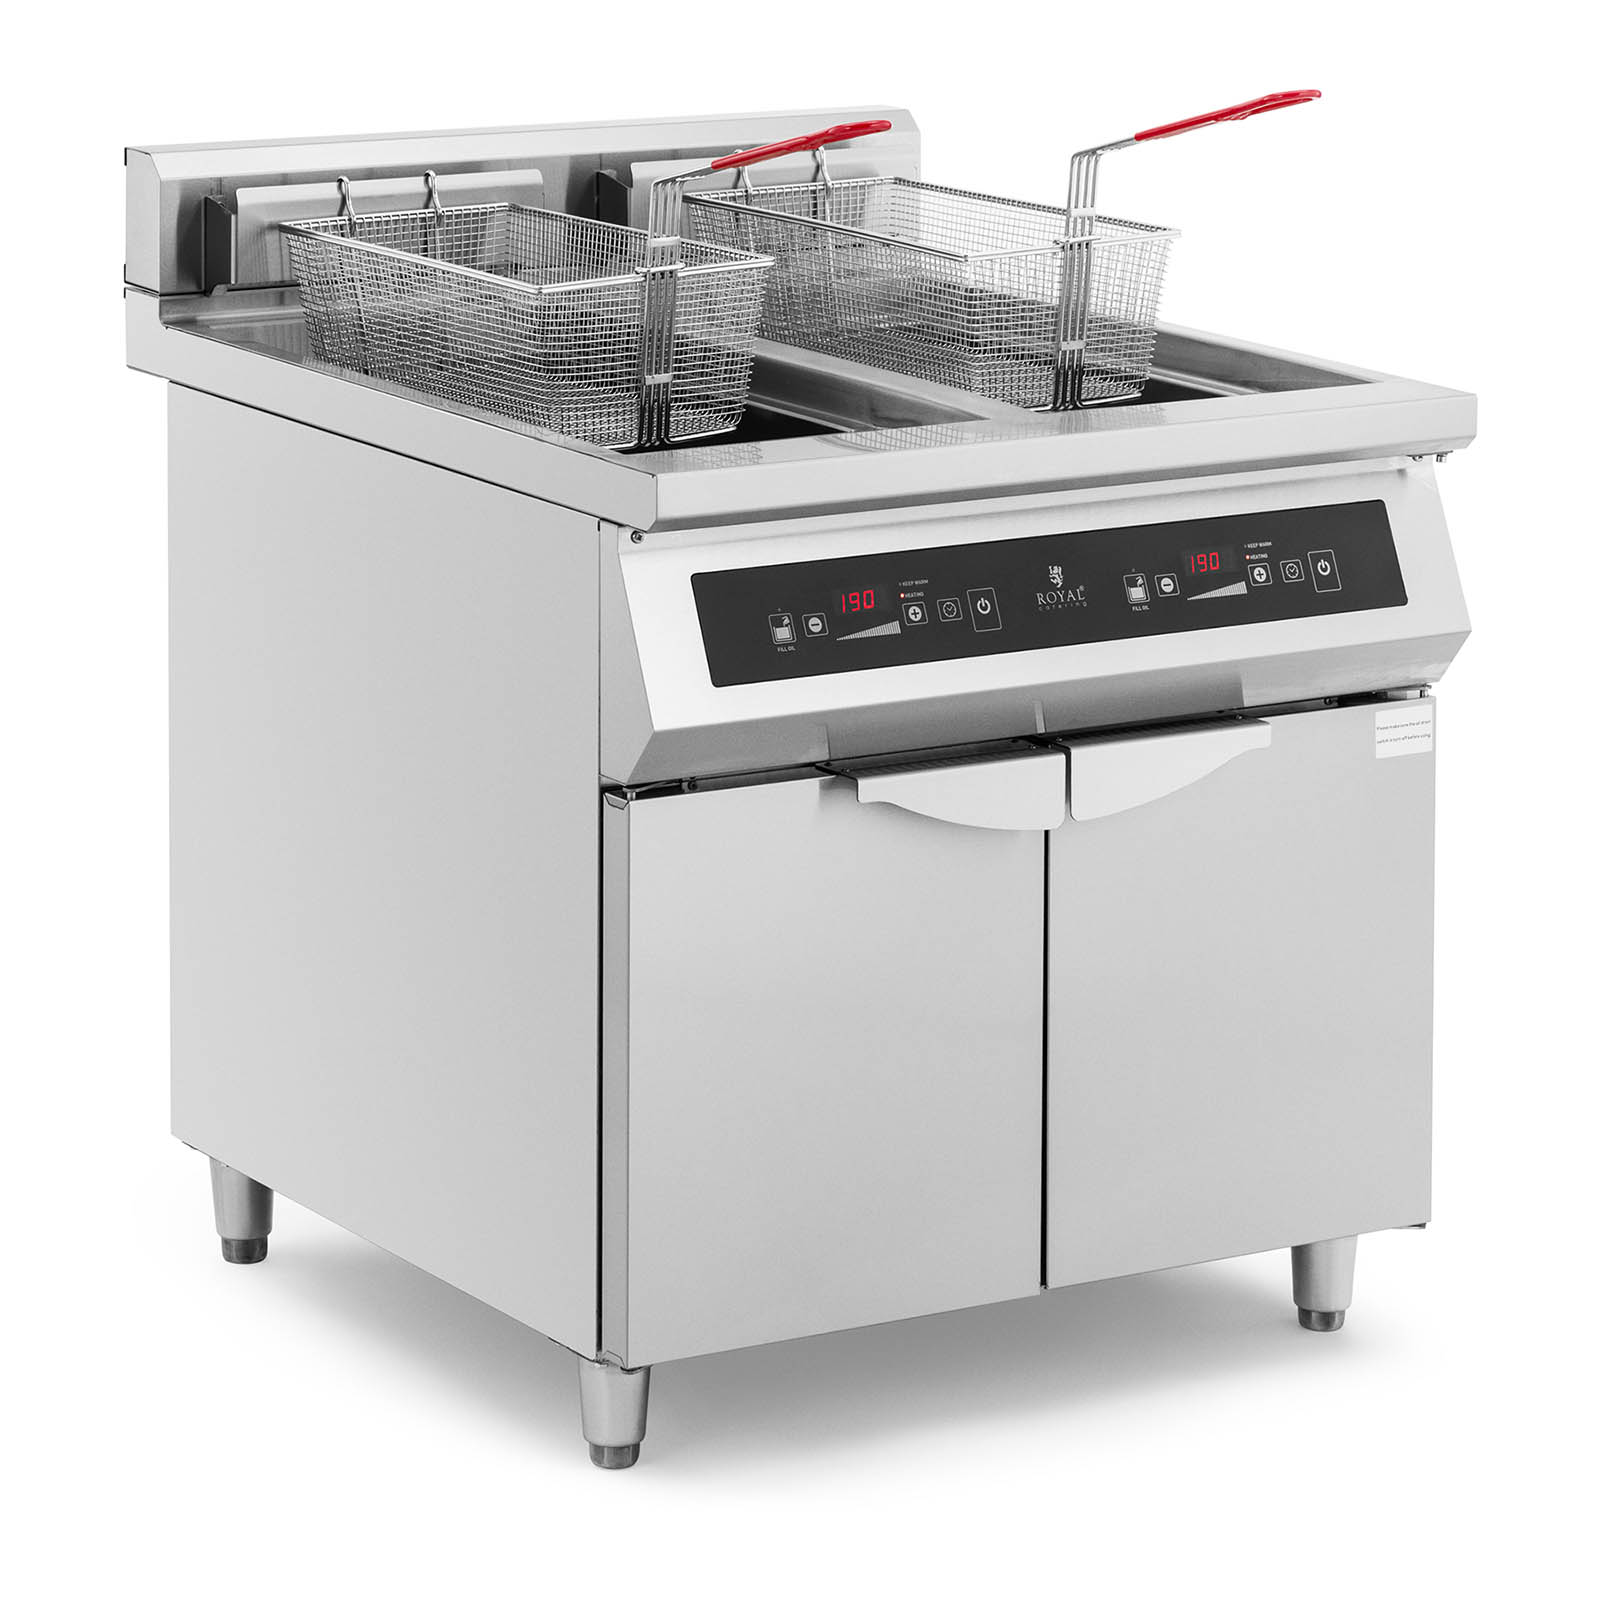 Induction Fryer - 2 x 30 L - 60 to 190 °C - Royal Catering